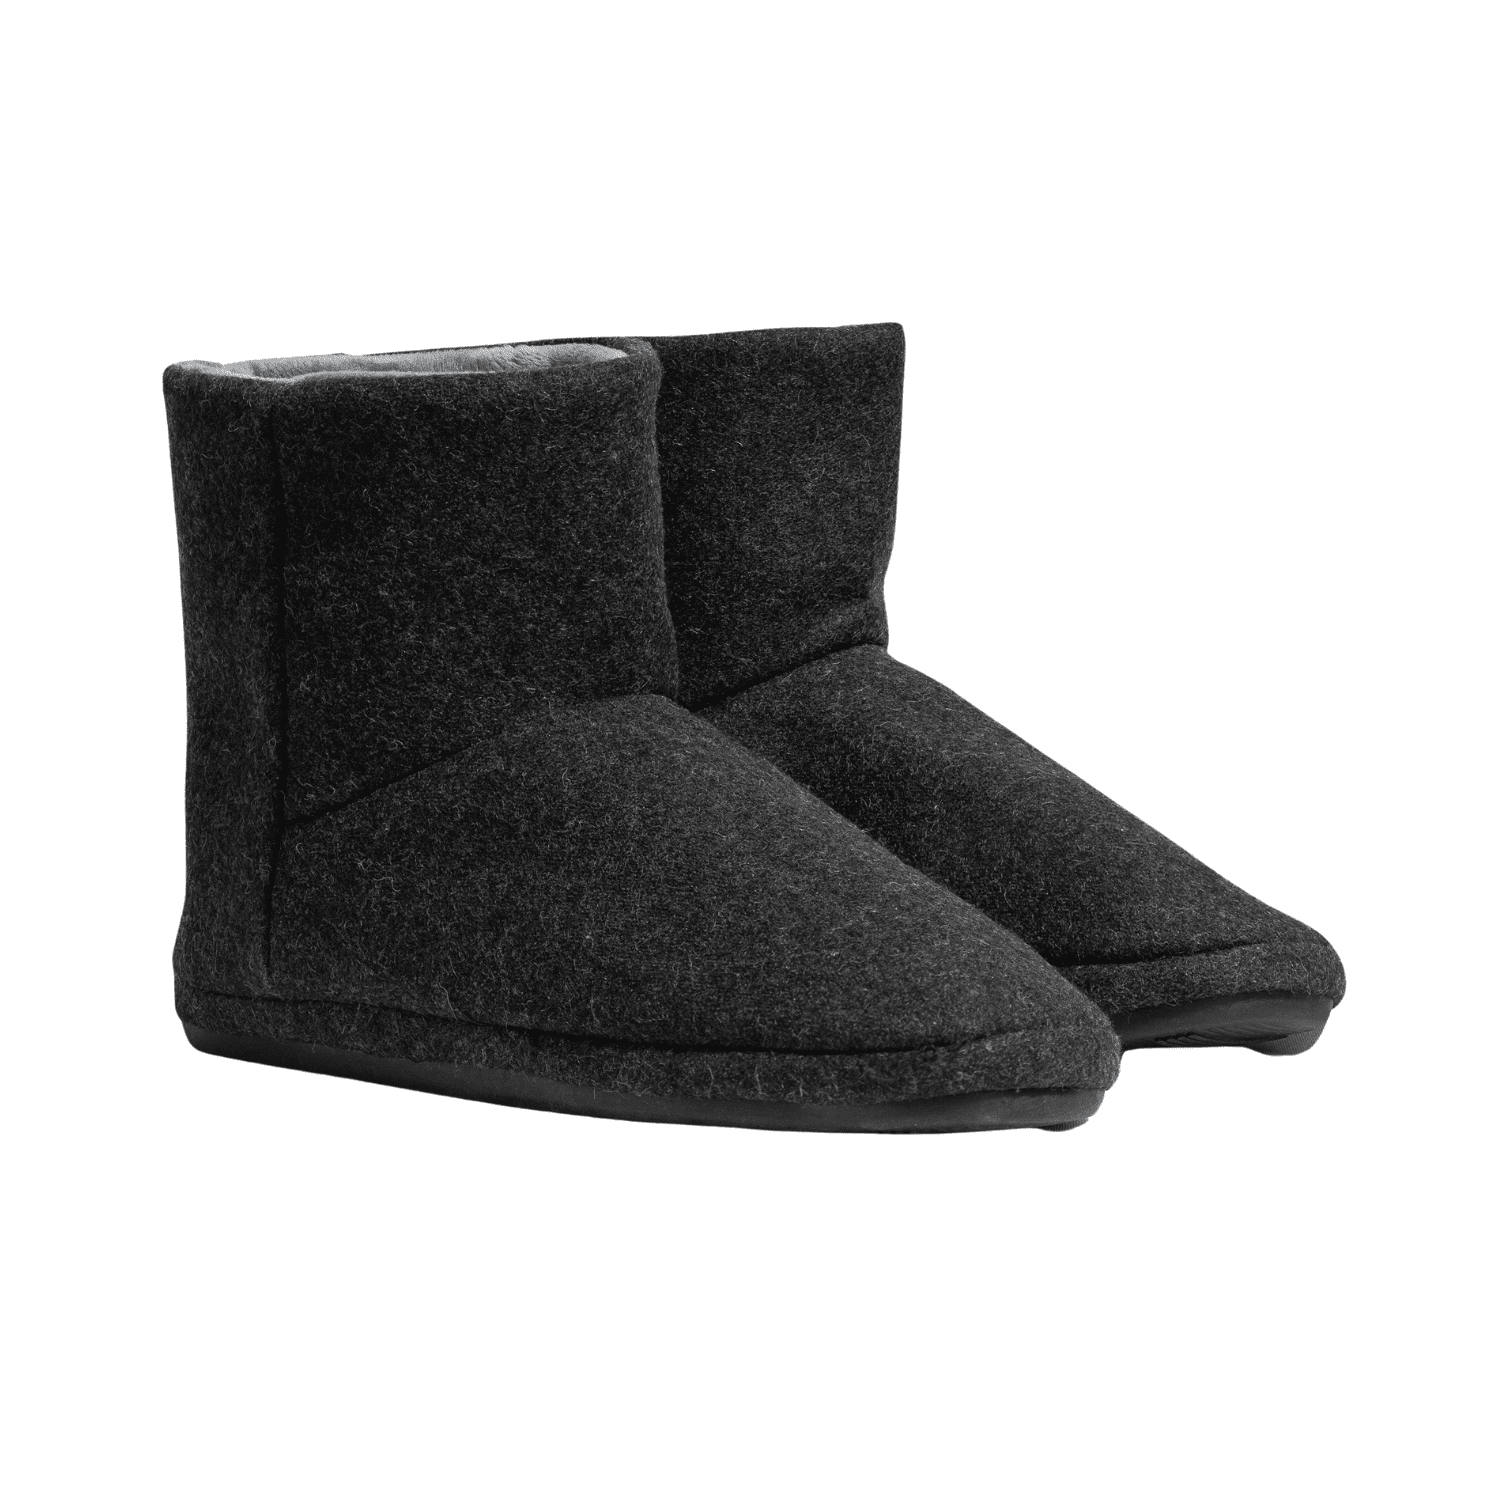 ARCH BOOTS - CHARCOAL MENS